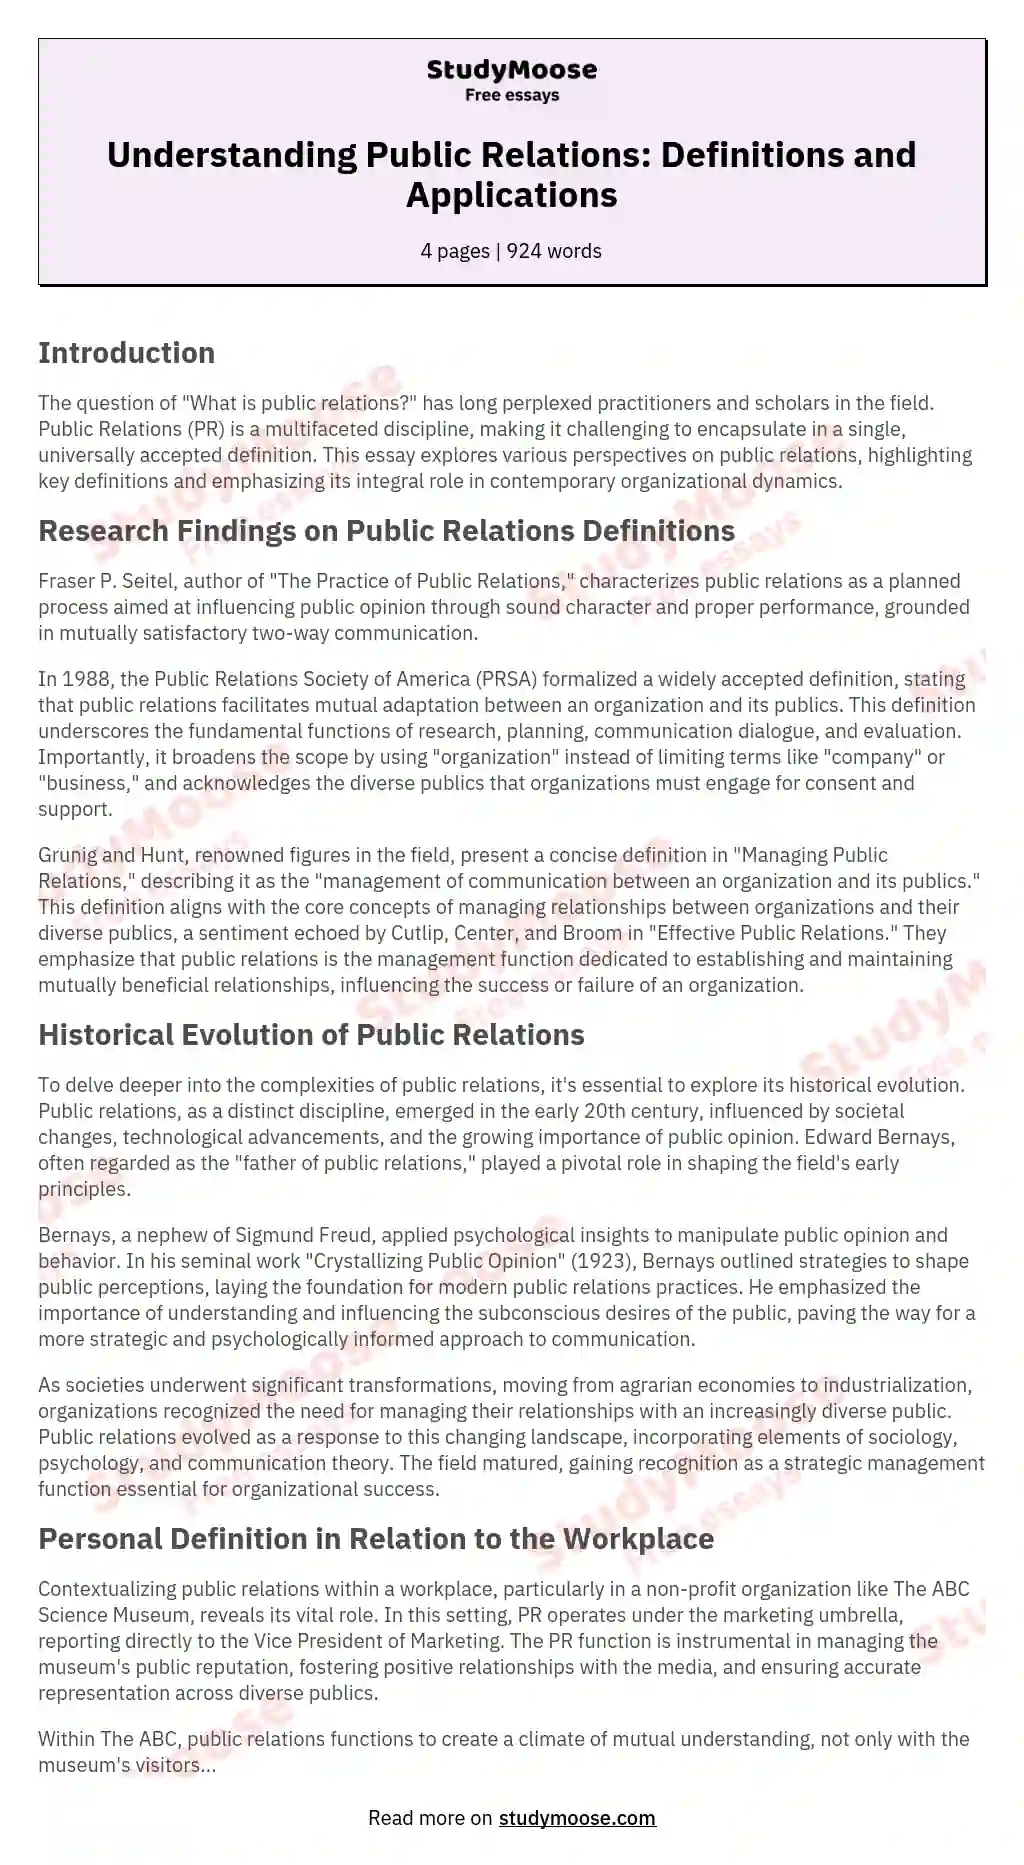 Understanding Public Relations: Definitions and Applications essay